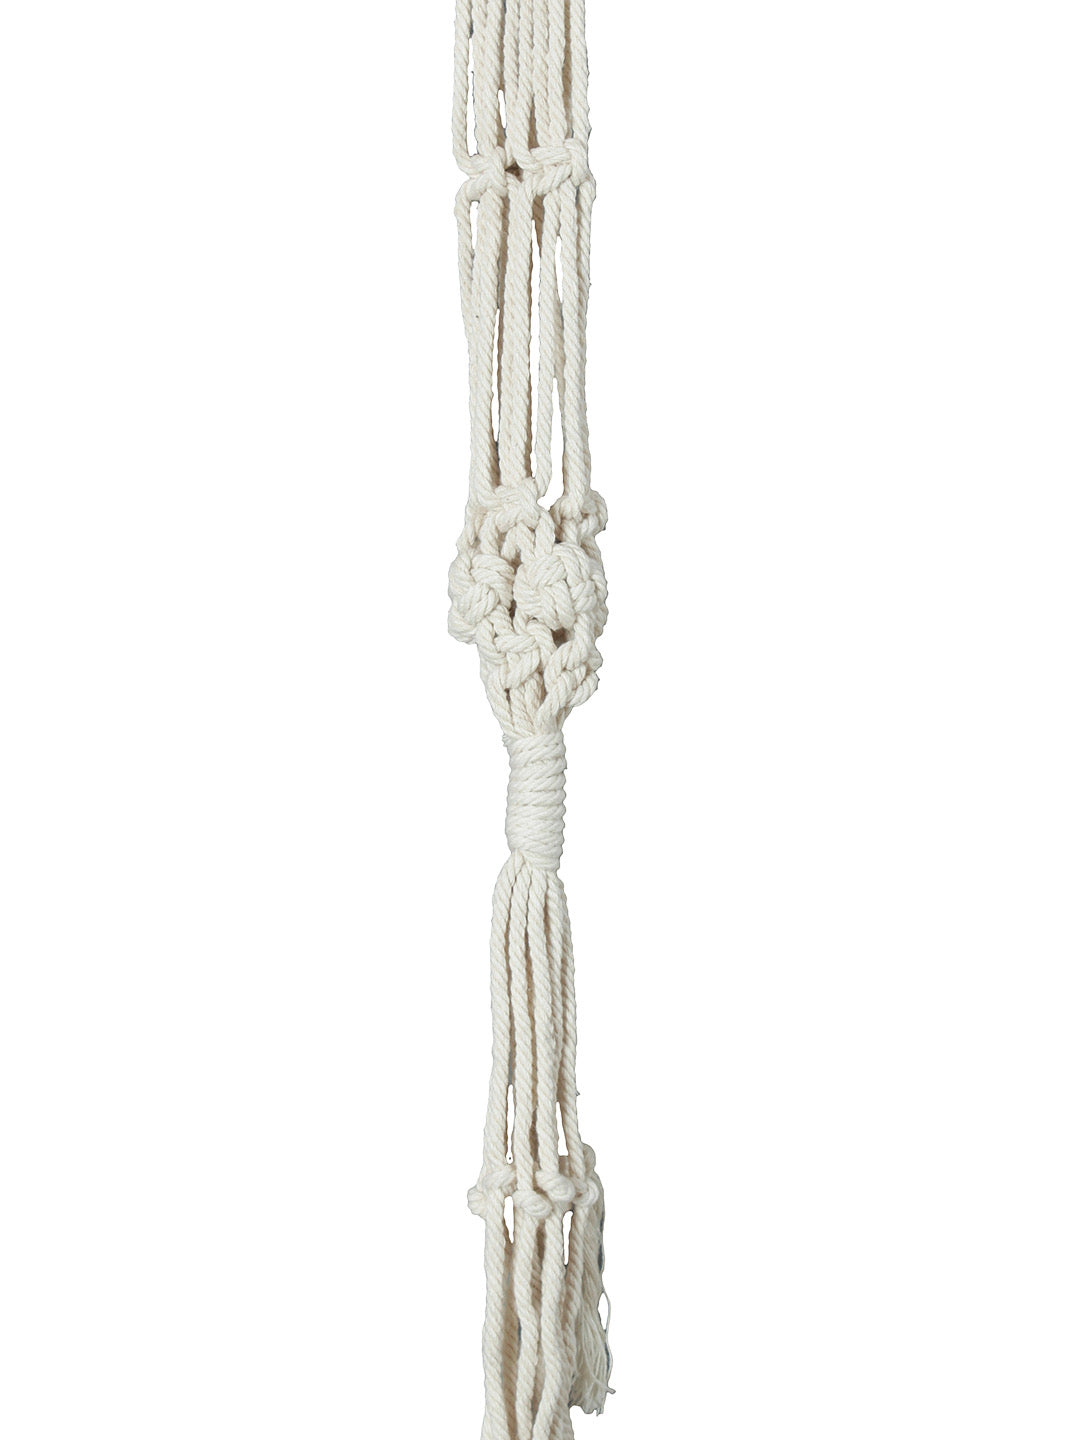 Hand Knotted Cotton Hanging for 01 Planter - Default Title (FAB20383A)